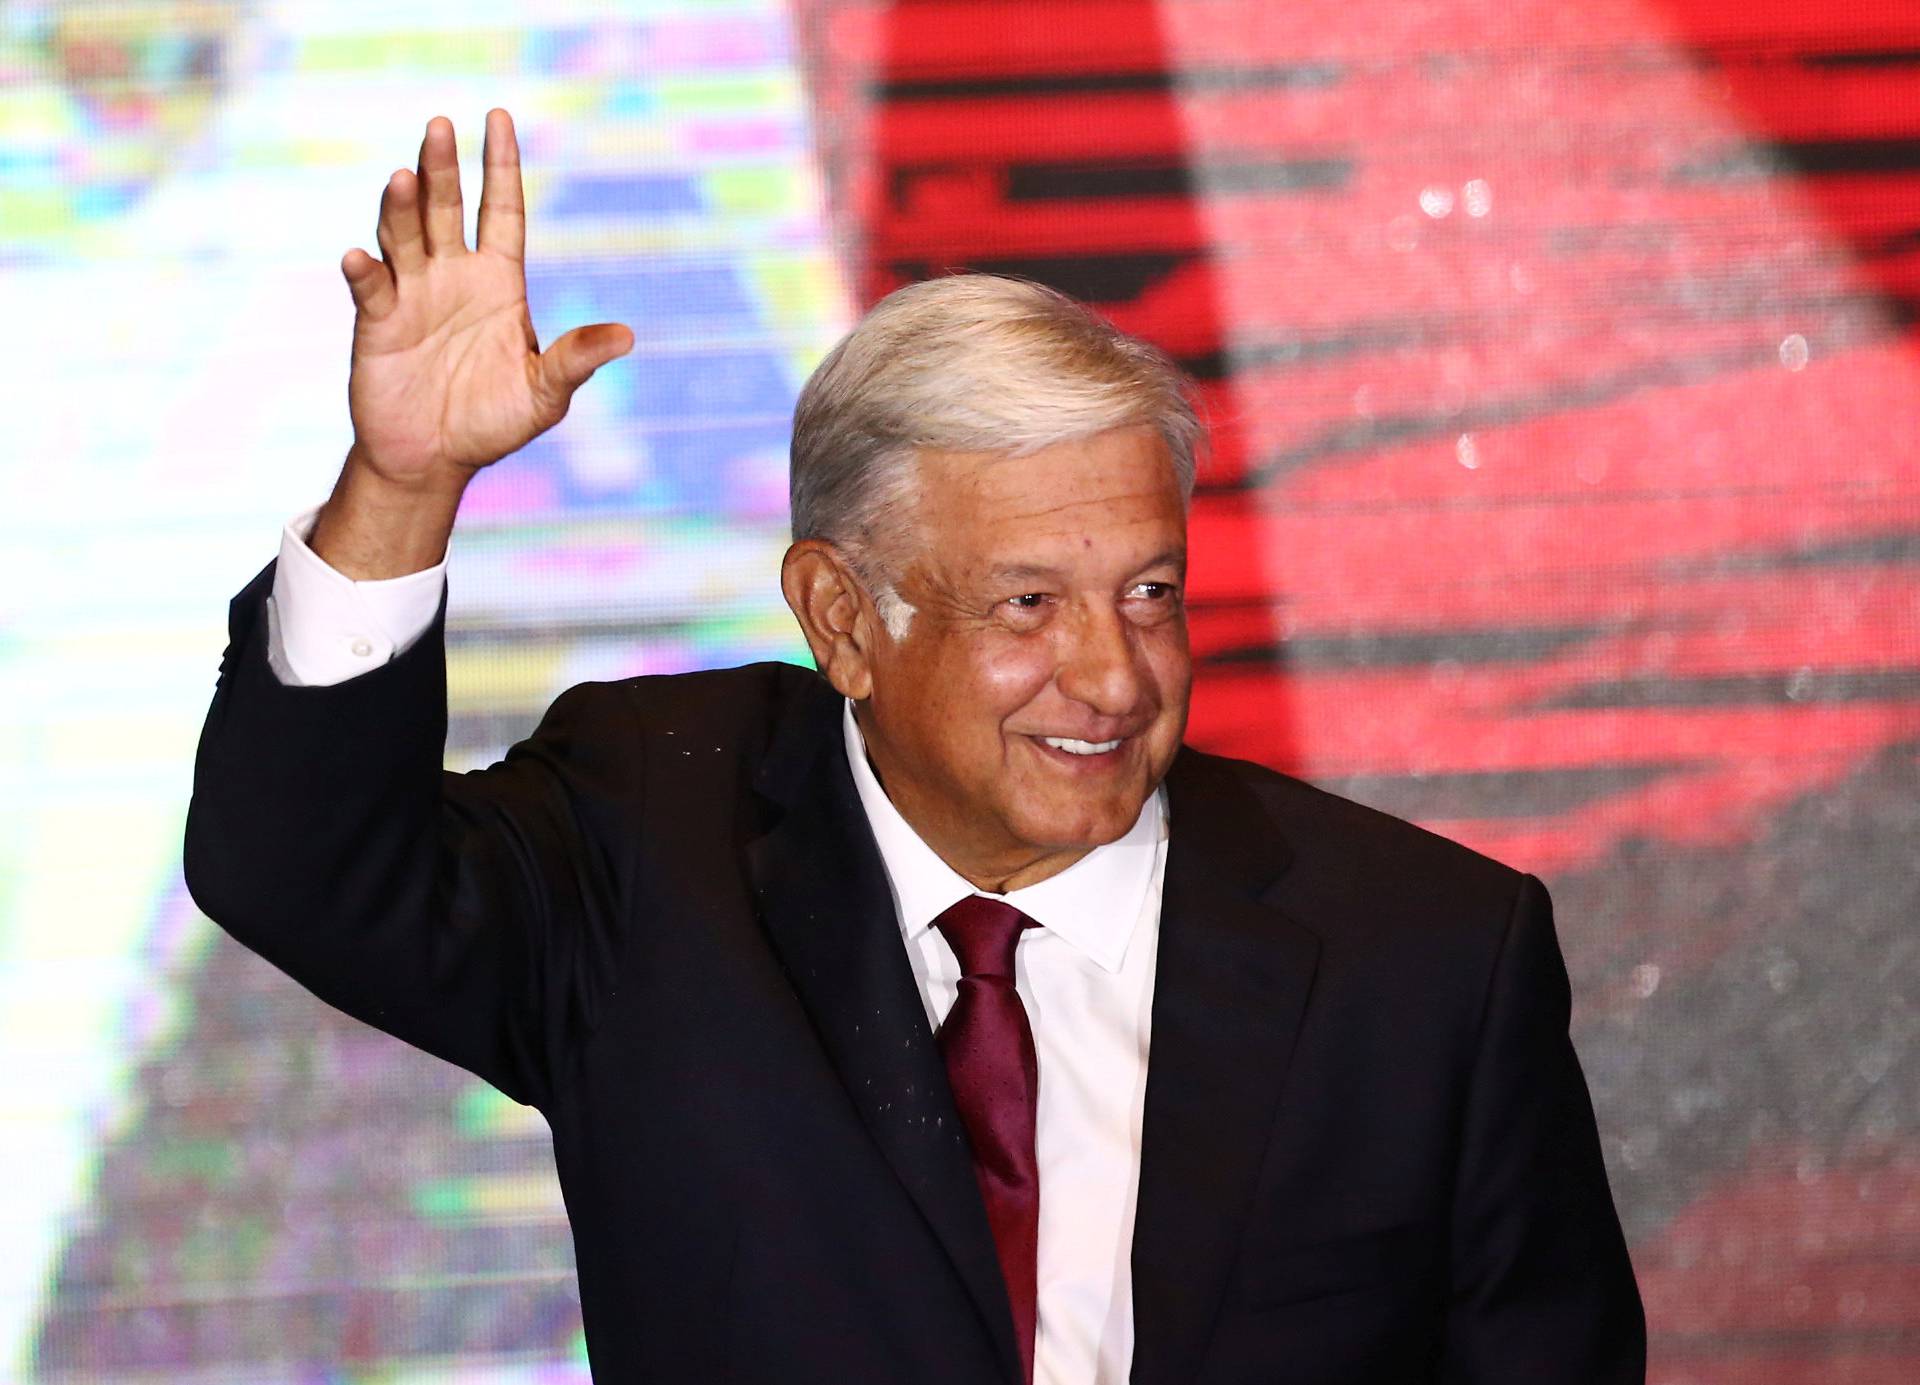 Presidential candidate Andres Manuel Lopez Obrador waves as he addresses supporters after polls closed in the presidential election, in Mexico City